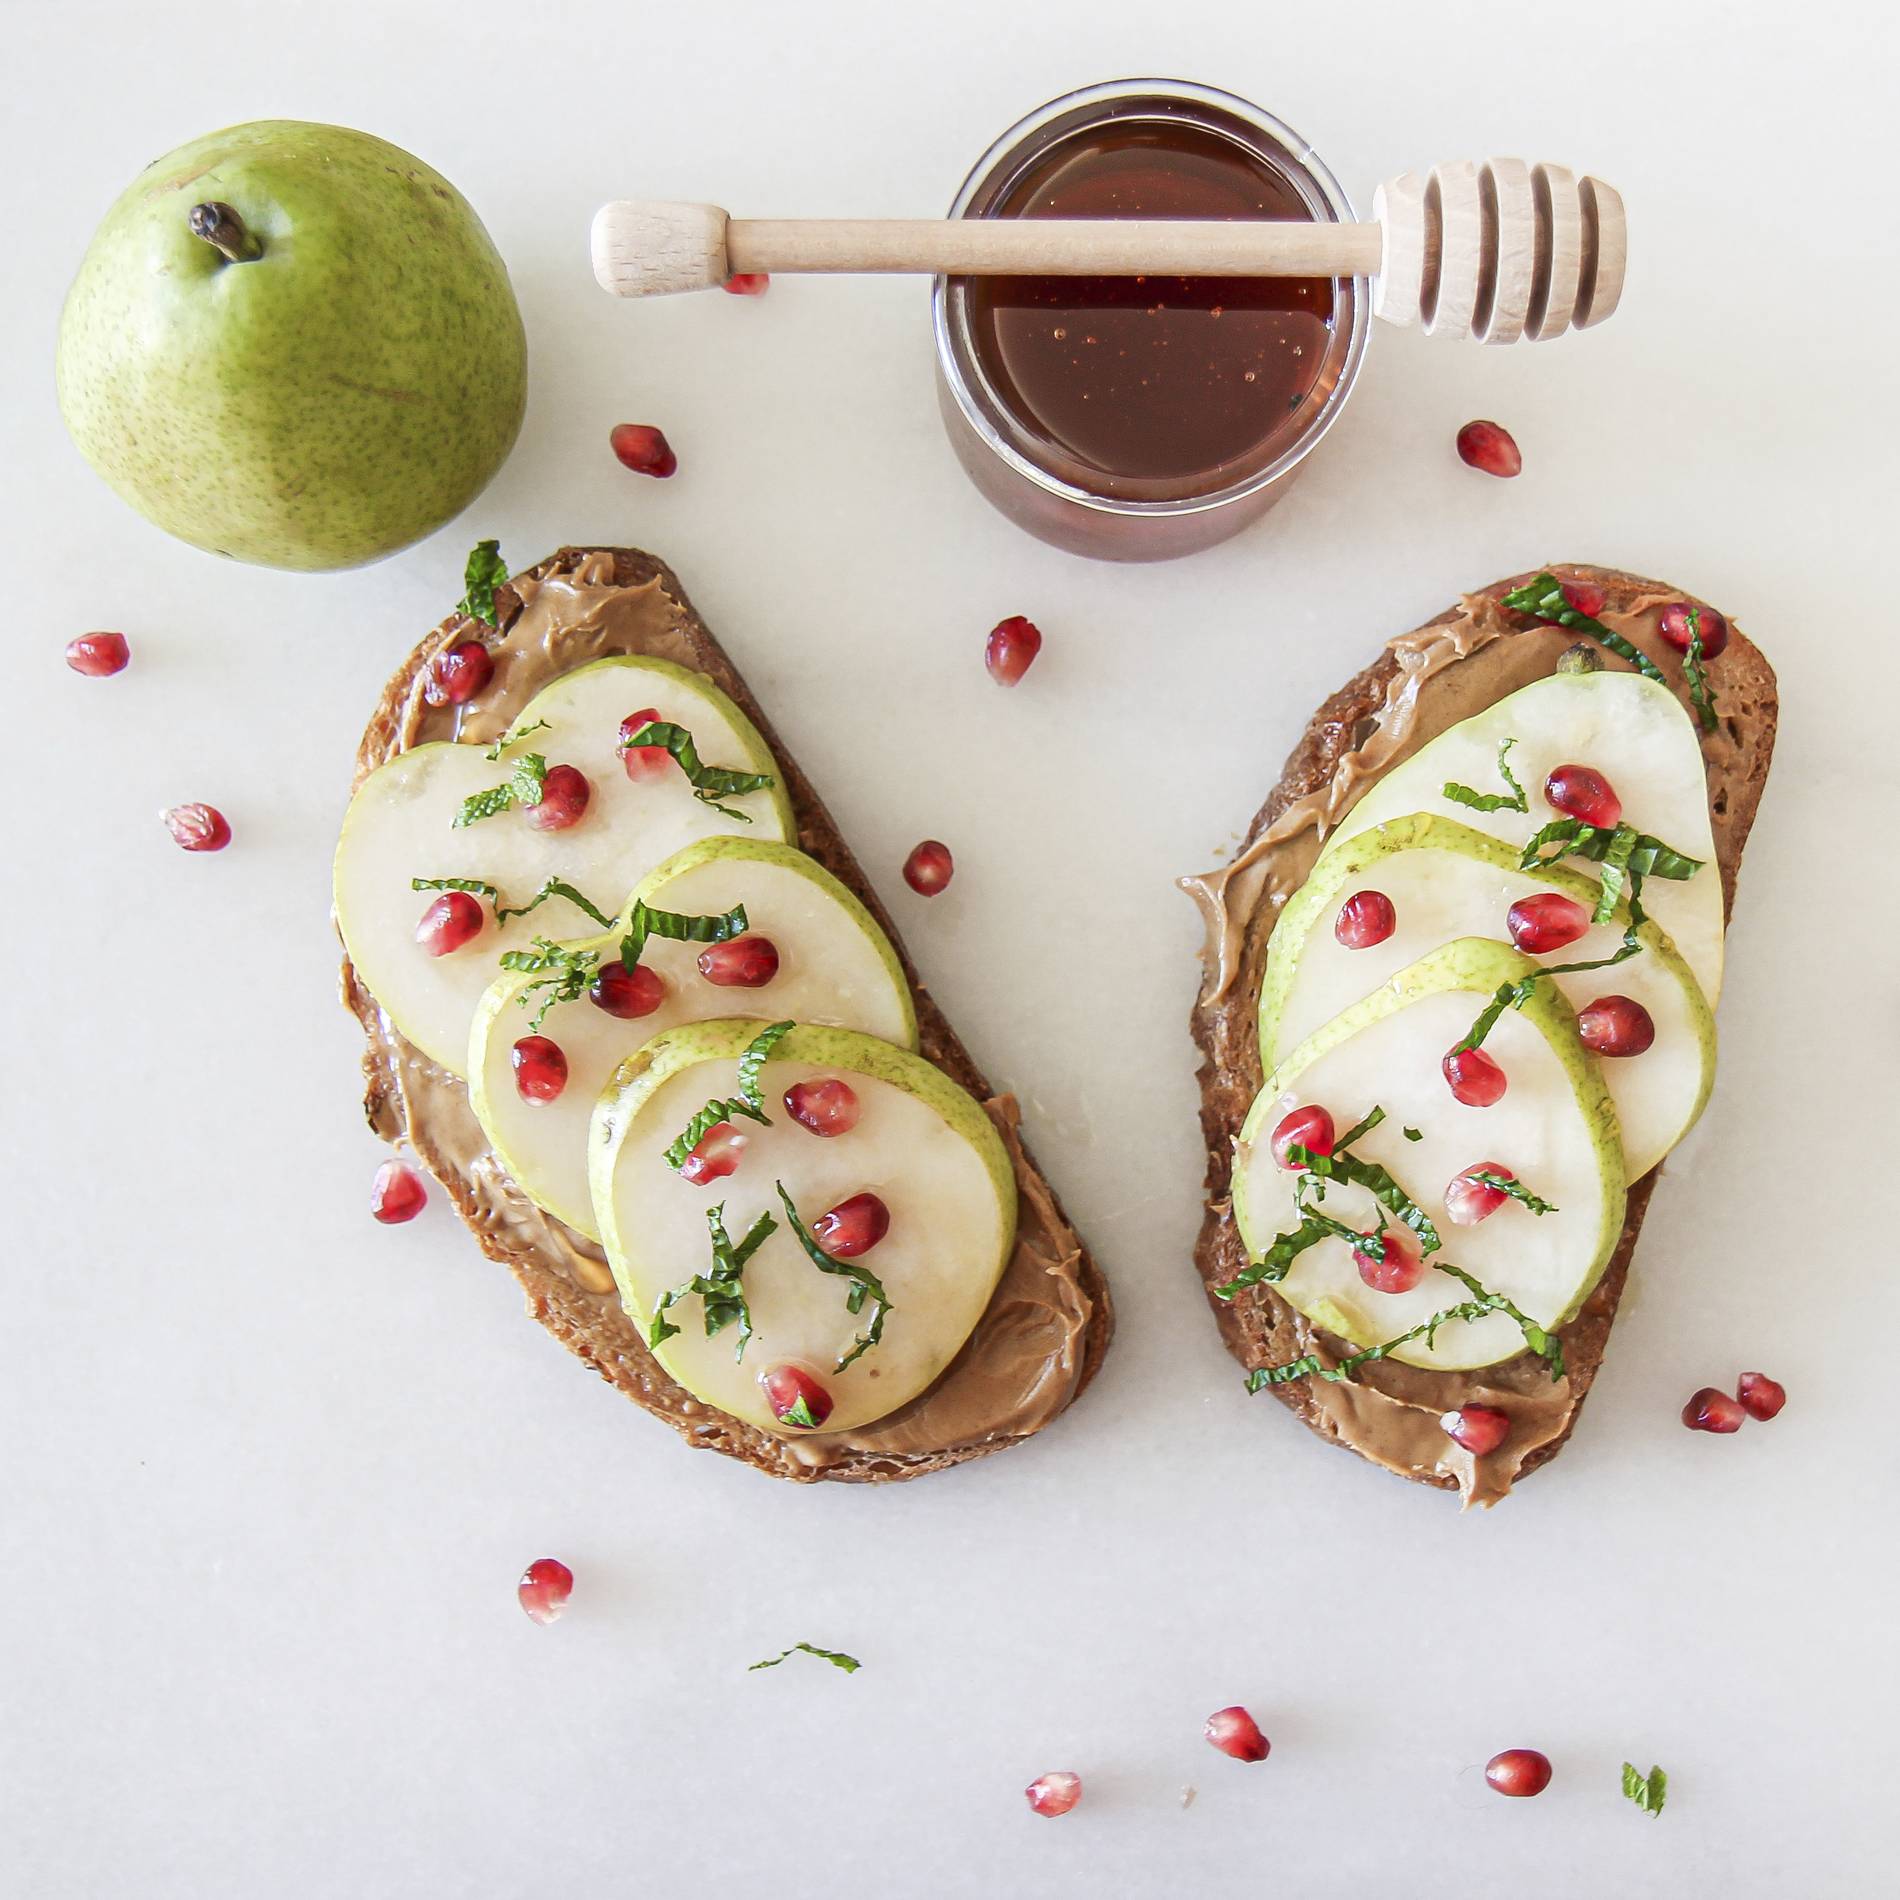 chop happy's open-faced homemade peanut butter and pear sandwich